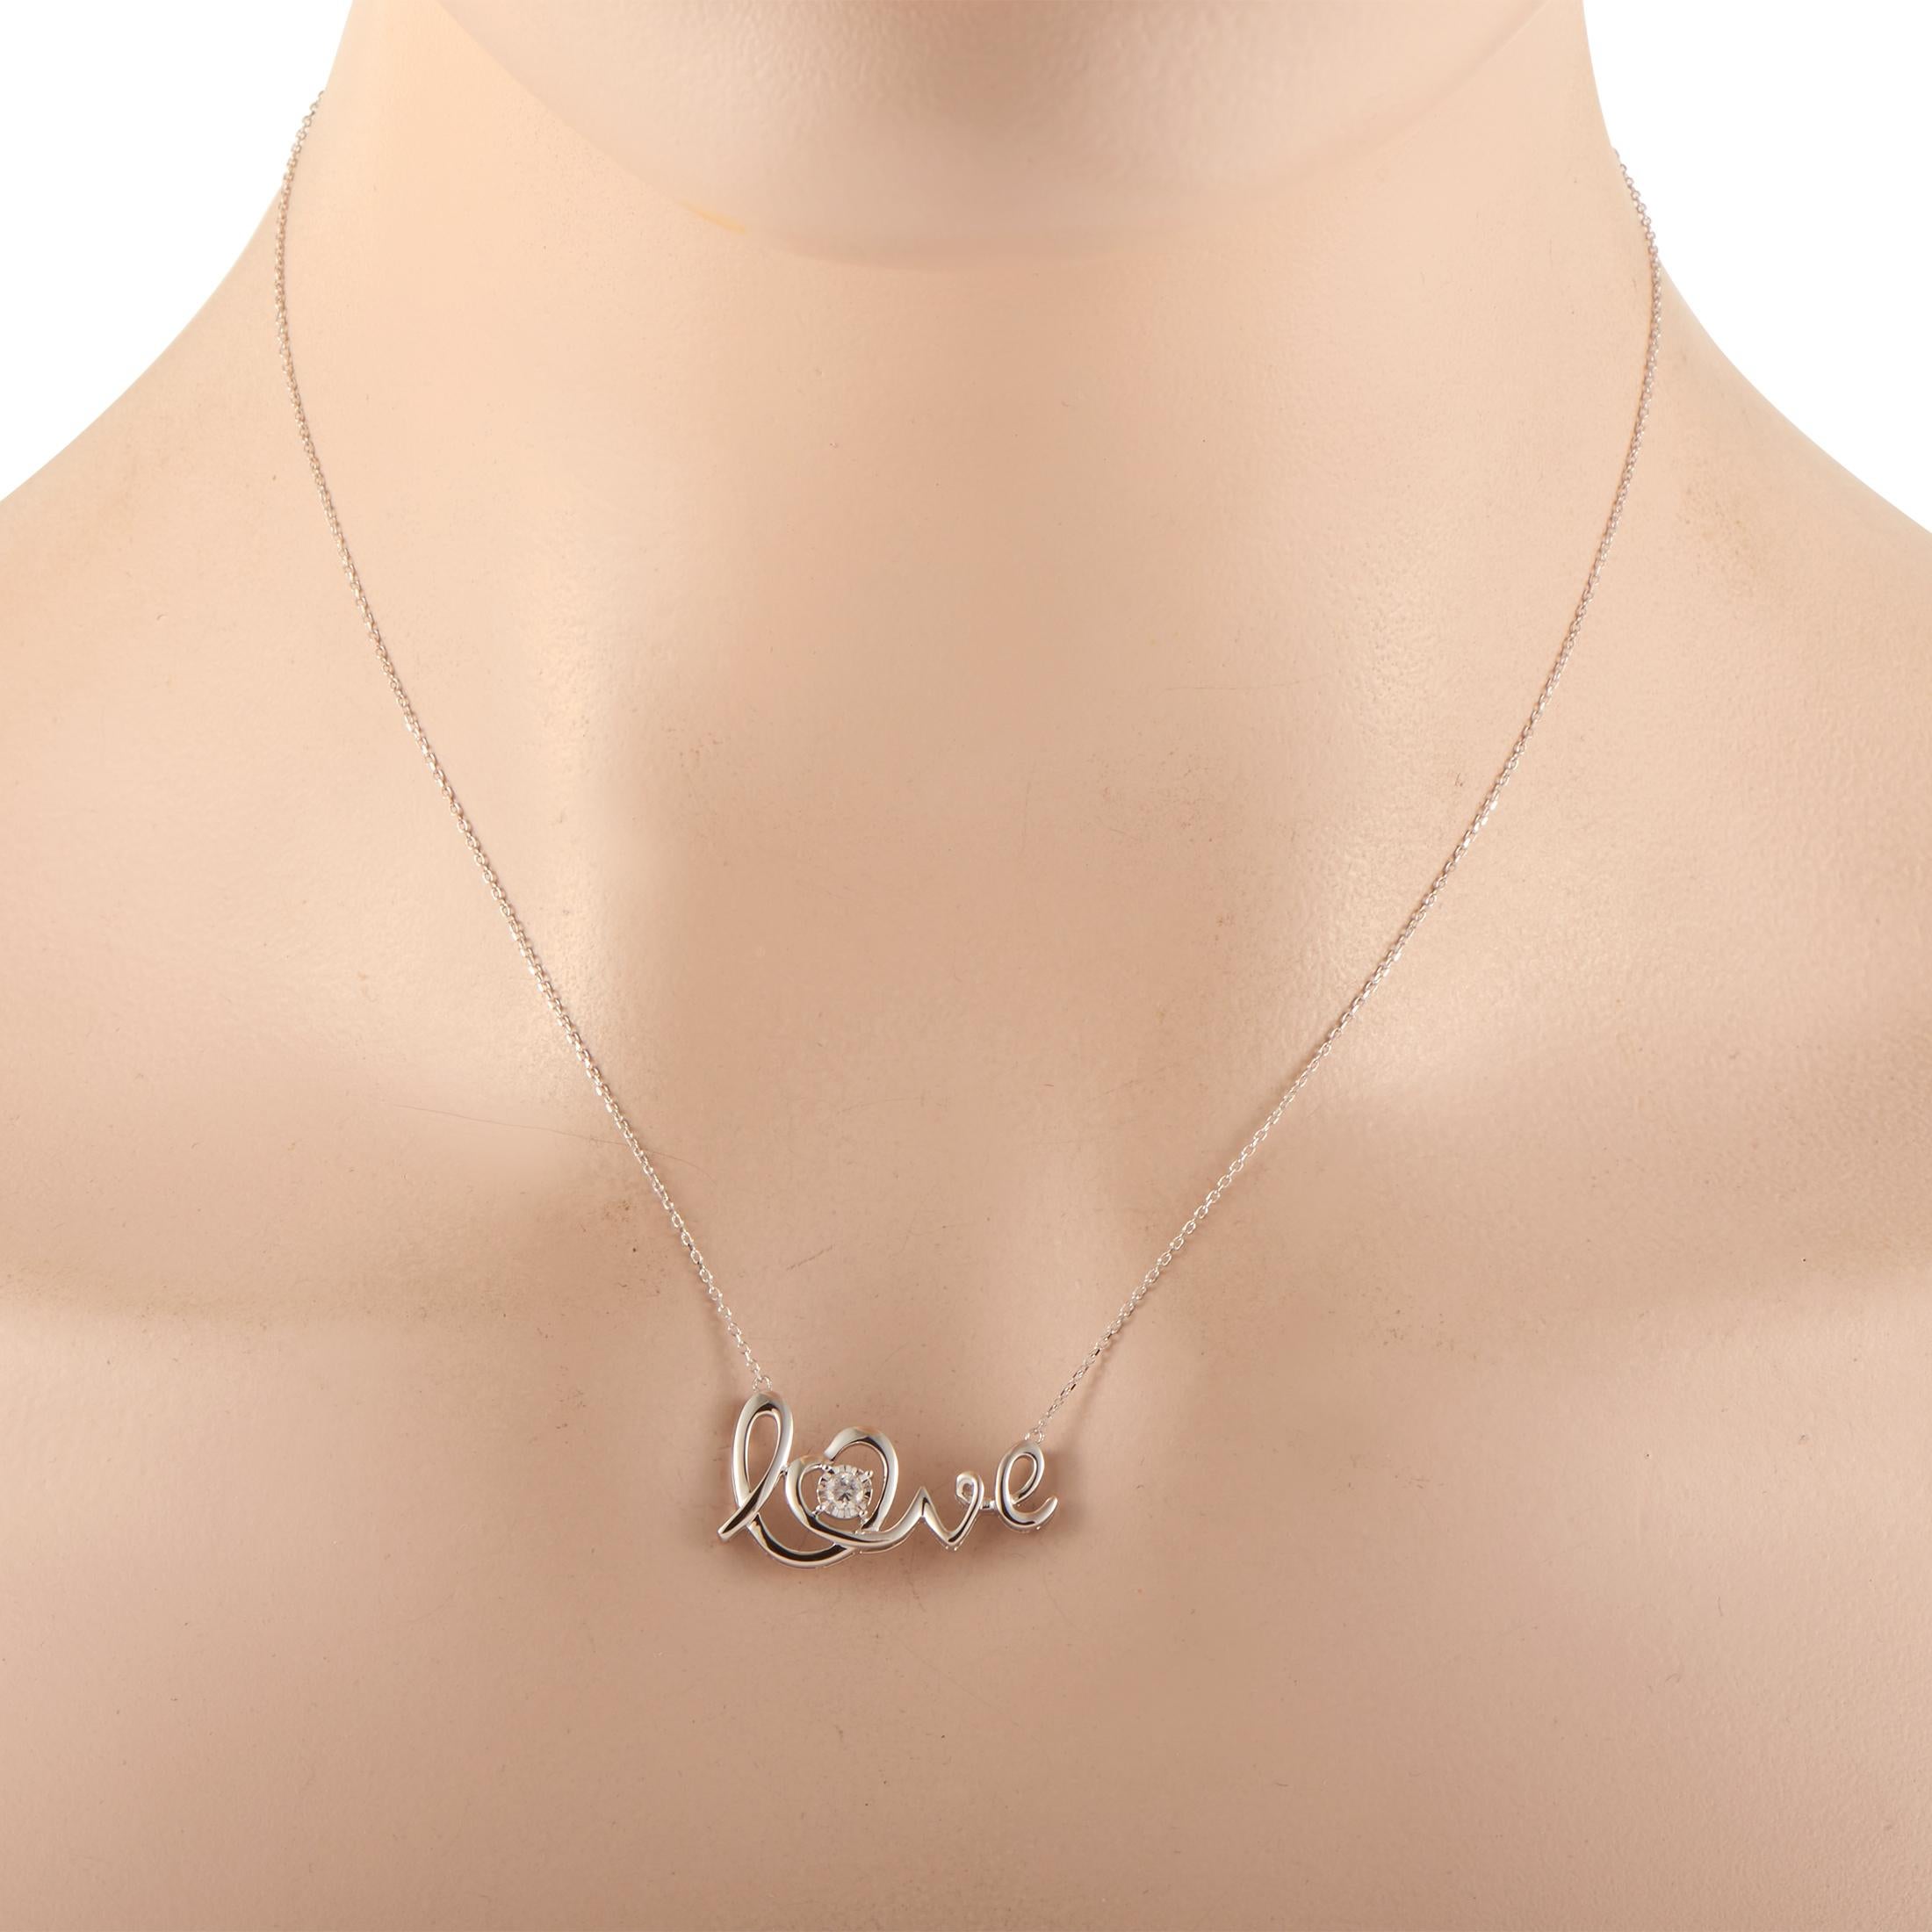 This LB Exclusive necklace is made of 14K white gold and embellished with a 0.10 ct diamond stone. The necklace weighs 3.2 grams and boasts a 16” chain and a “love” pendant that measures 0.75” in length and 1.15” in width.
 
 Offered in brand new